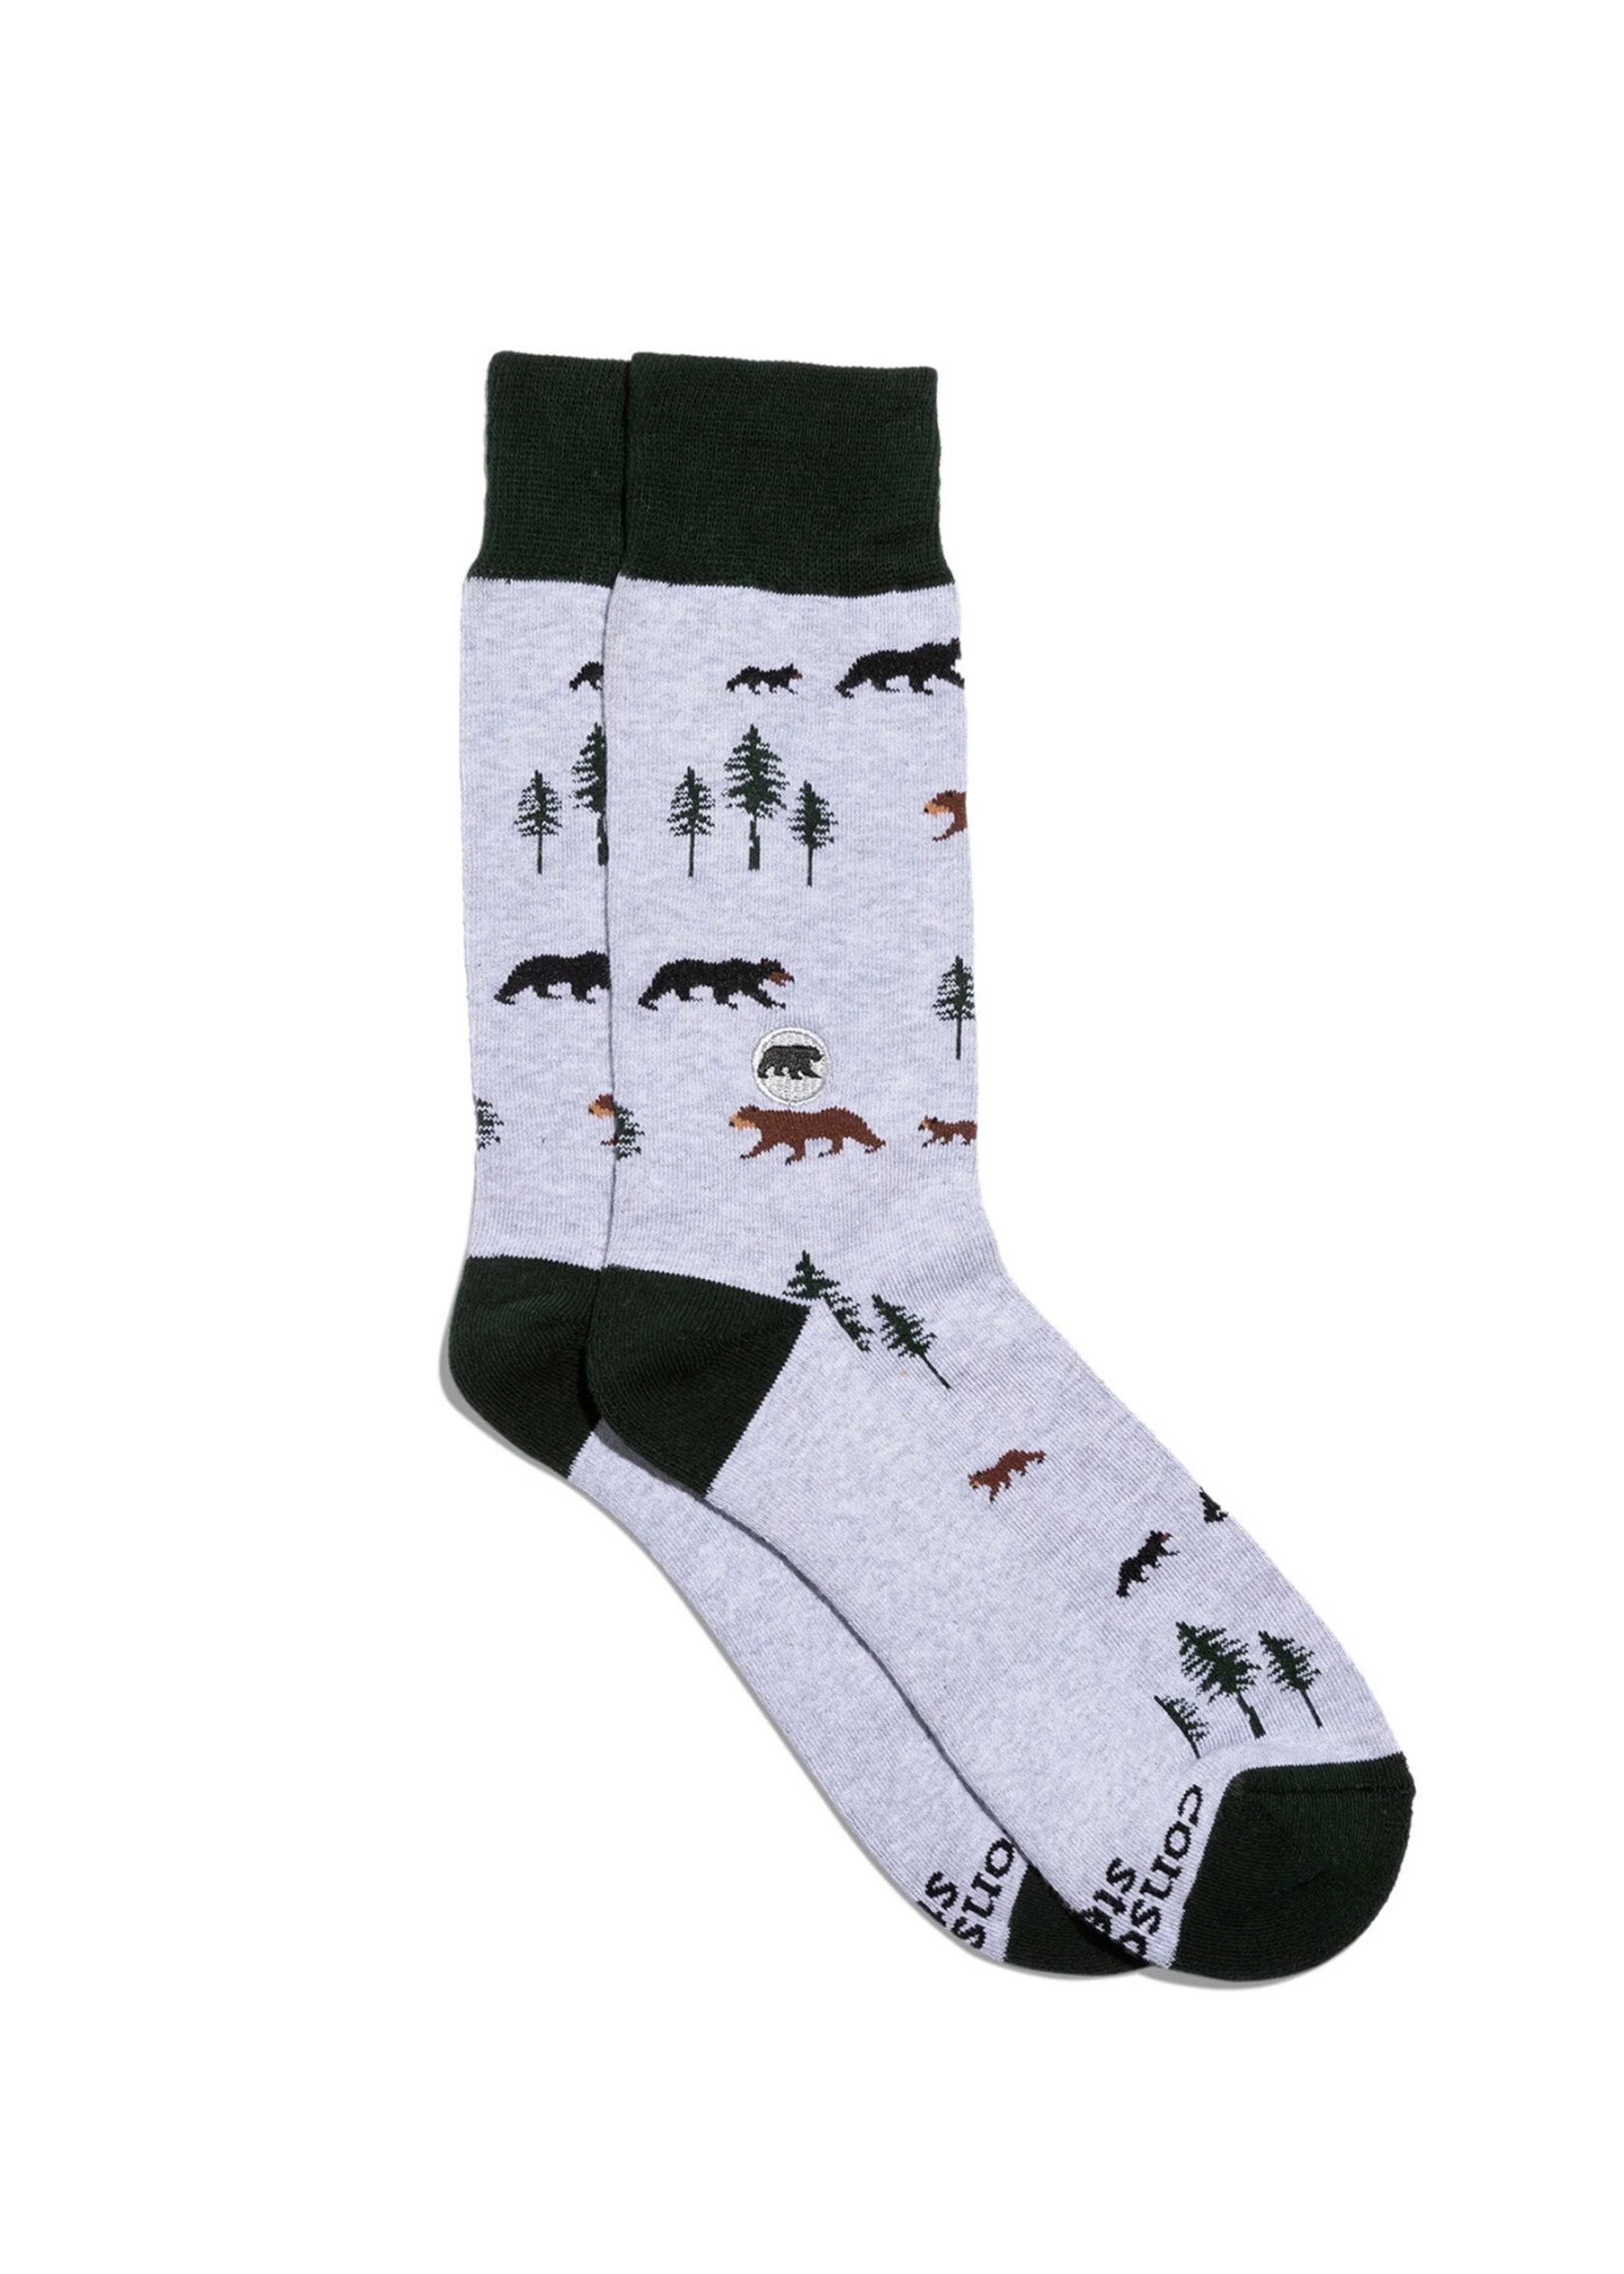 Conscious Step Women's Socks That Protect Bears